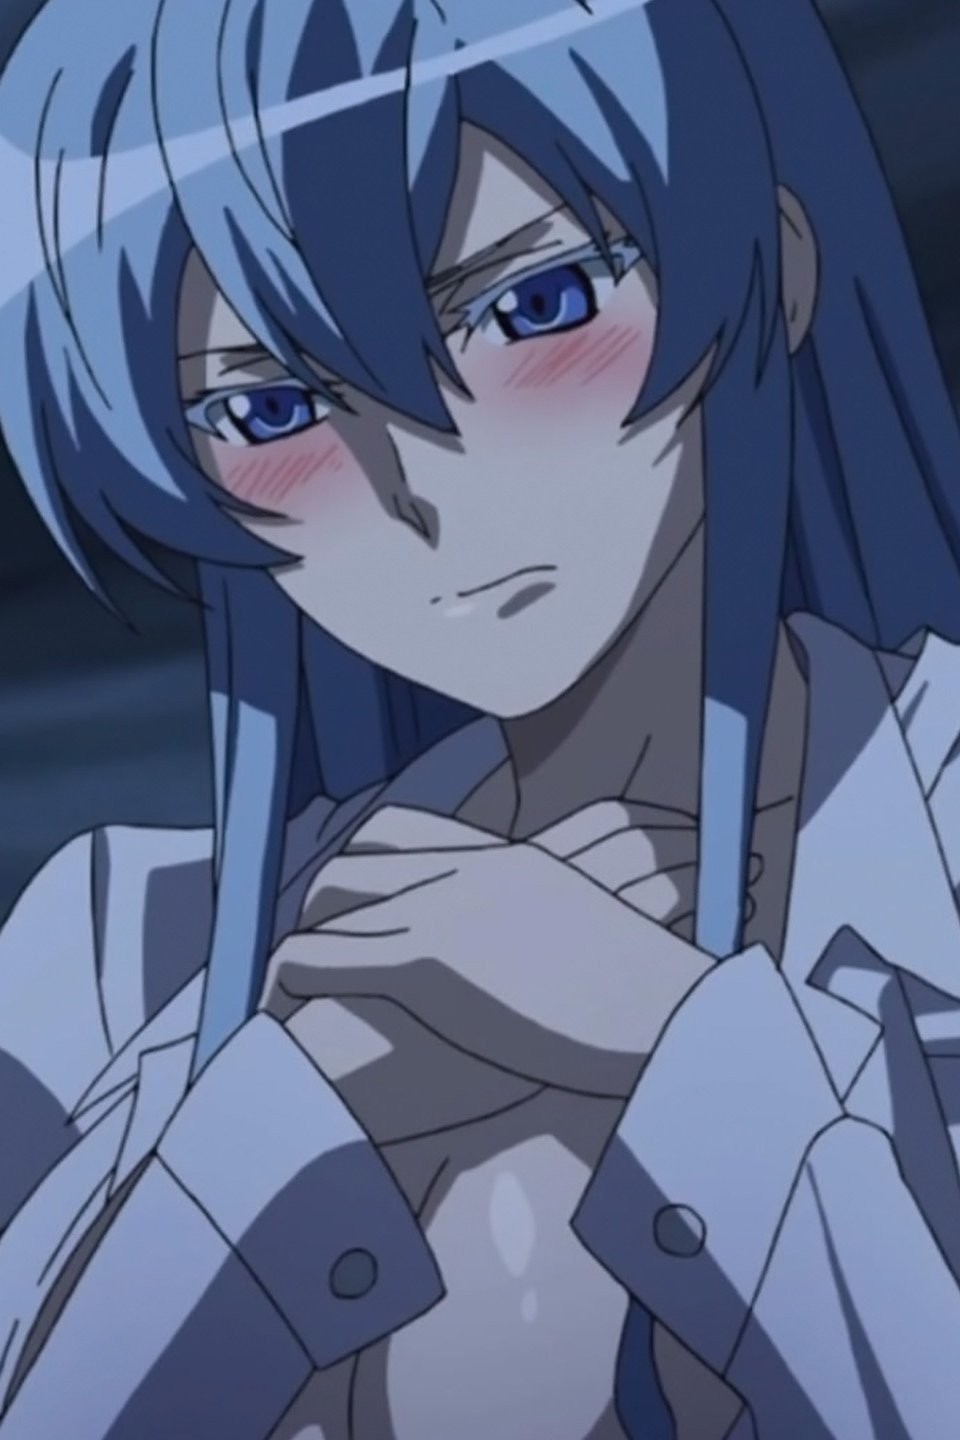 Akame ga Kill! Ep. 10: The softer side of Esdeath